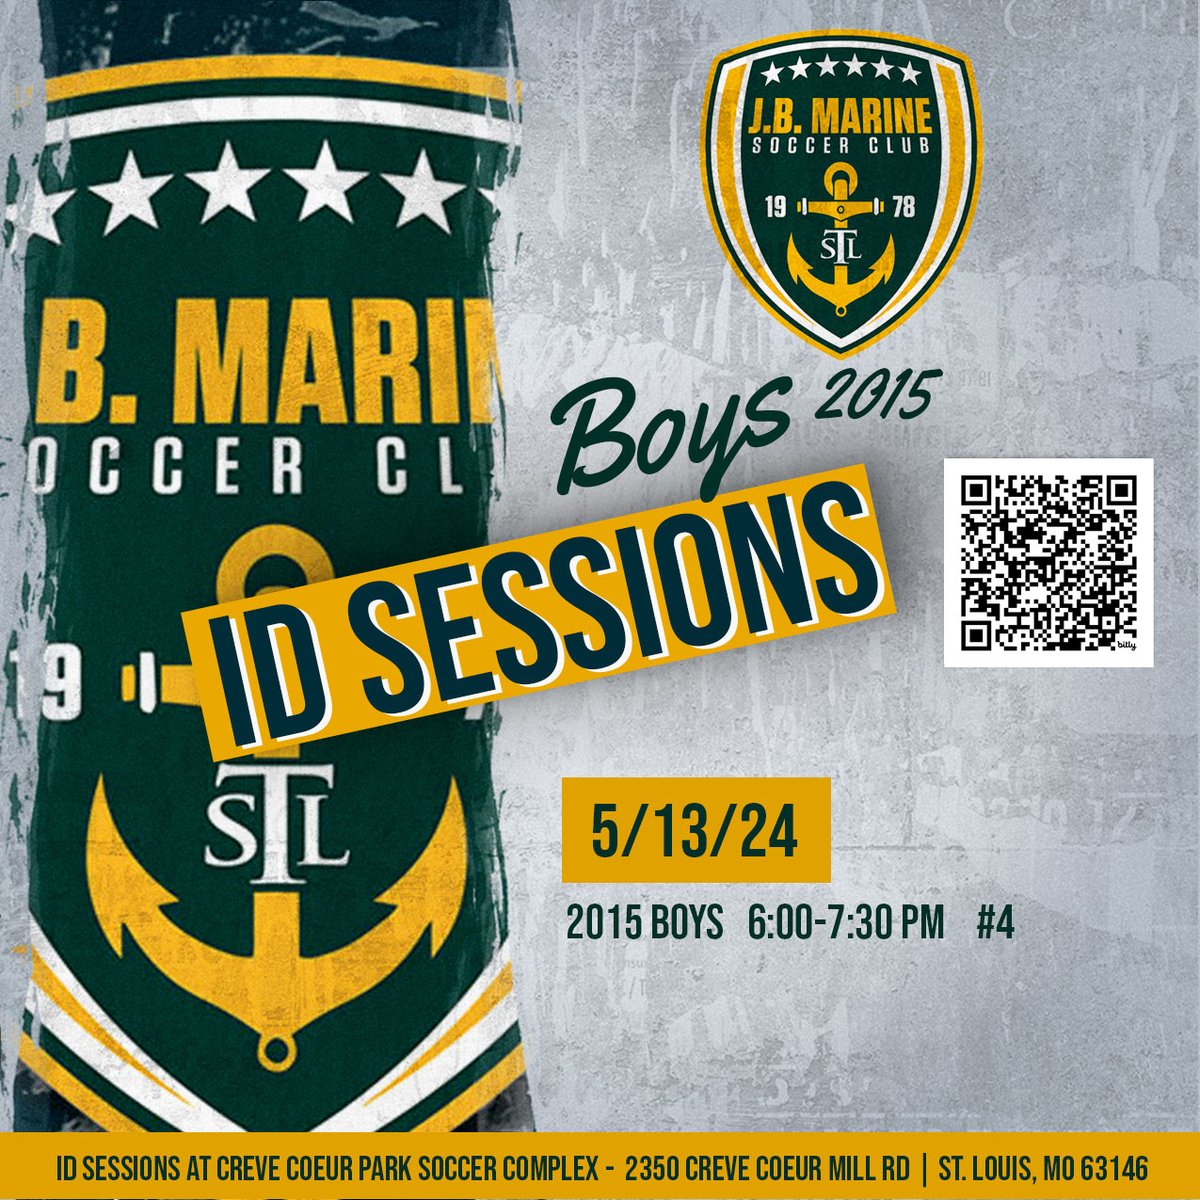 ⚽ REMINDER OF UPCOMING BOYS OPEN ID SESSIONS! Check out our website today at jbmarinesc.com/kickarounds-tr… for the latest information and how to register for ID sessions for boys' teams in the 2015 age group.